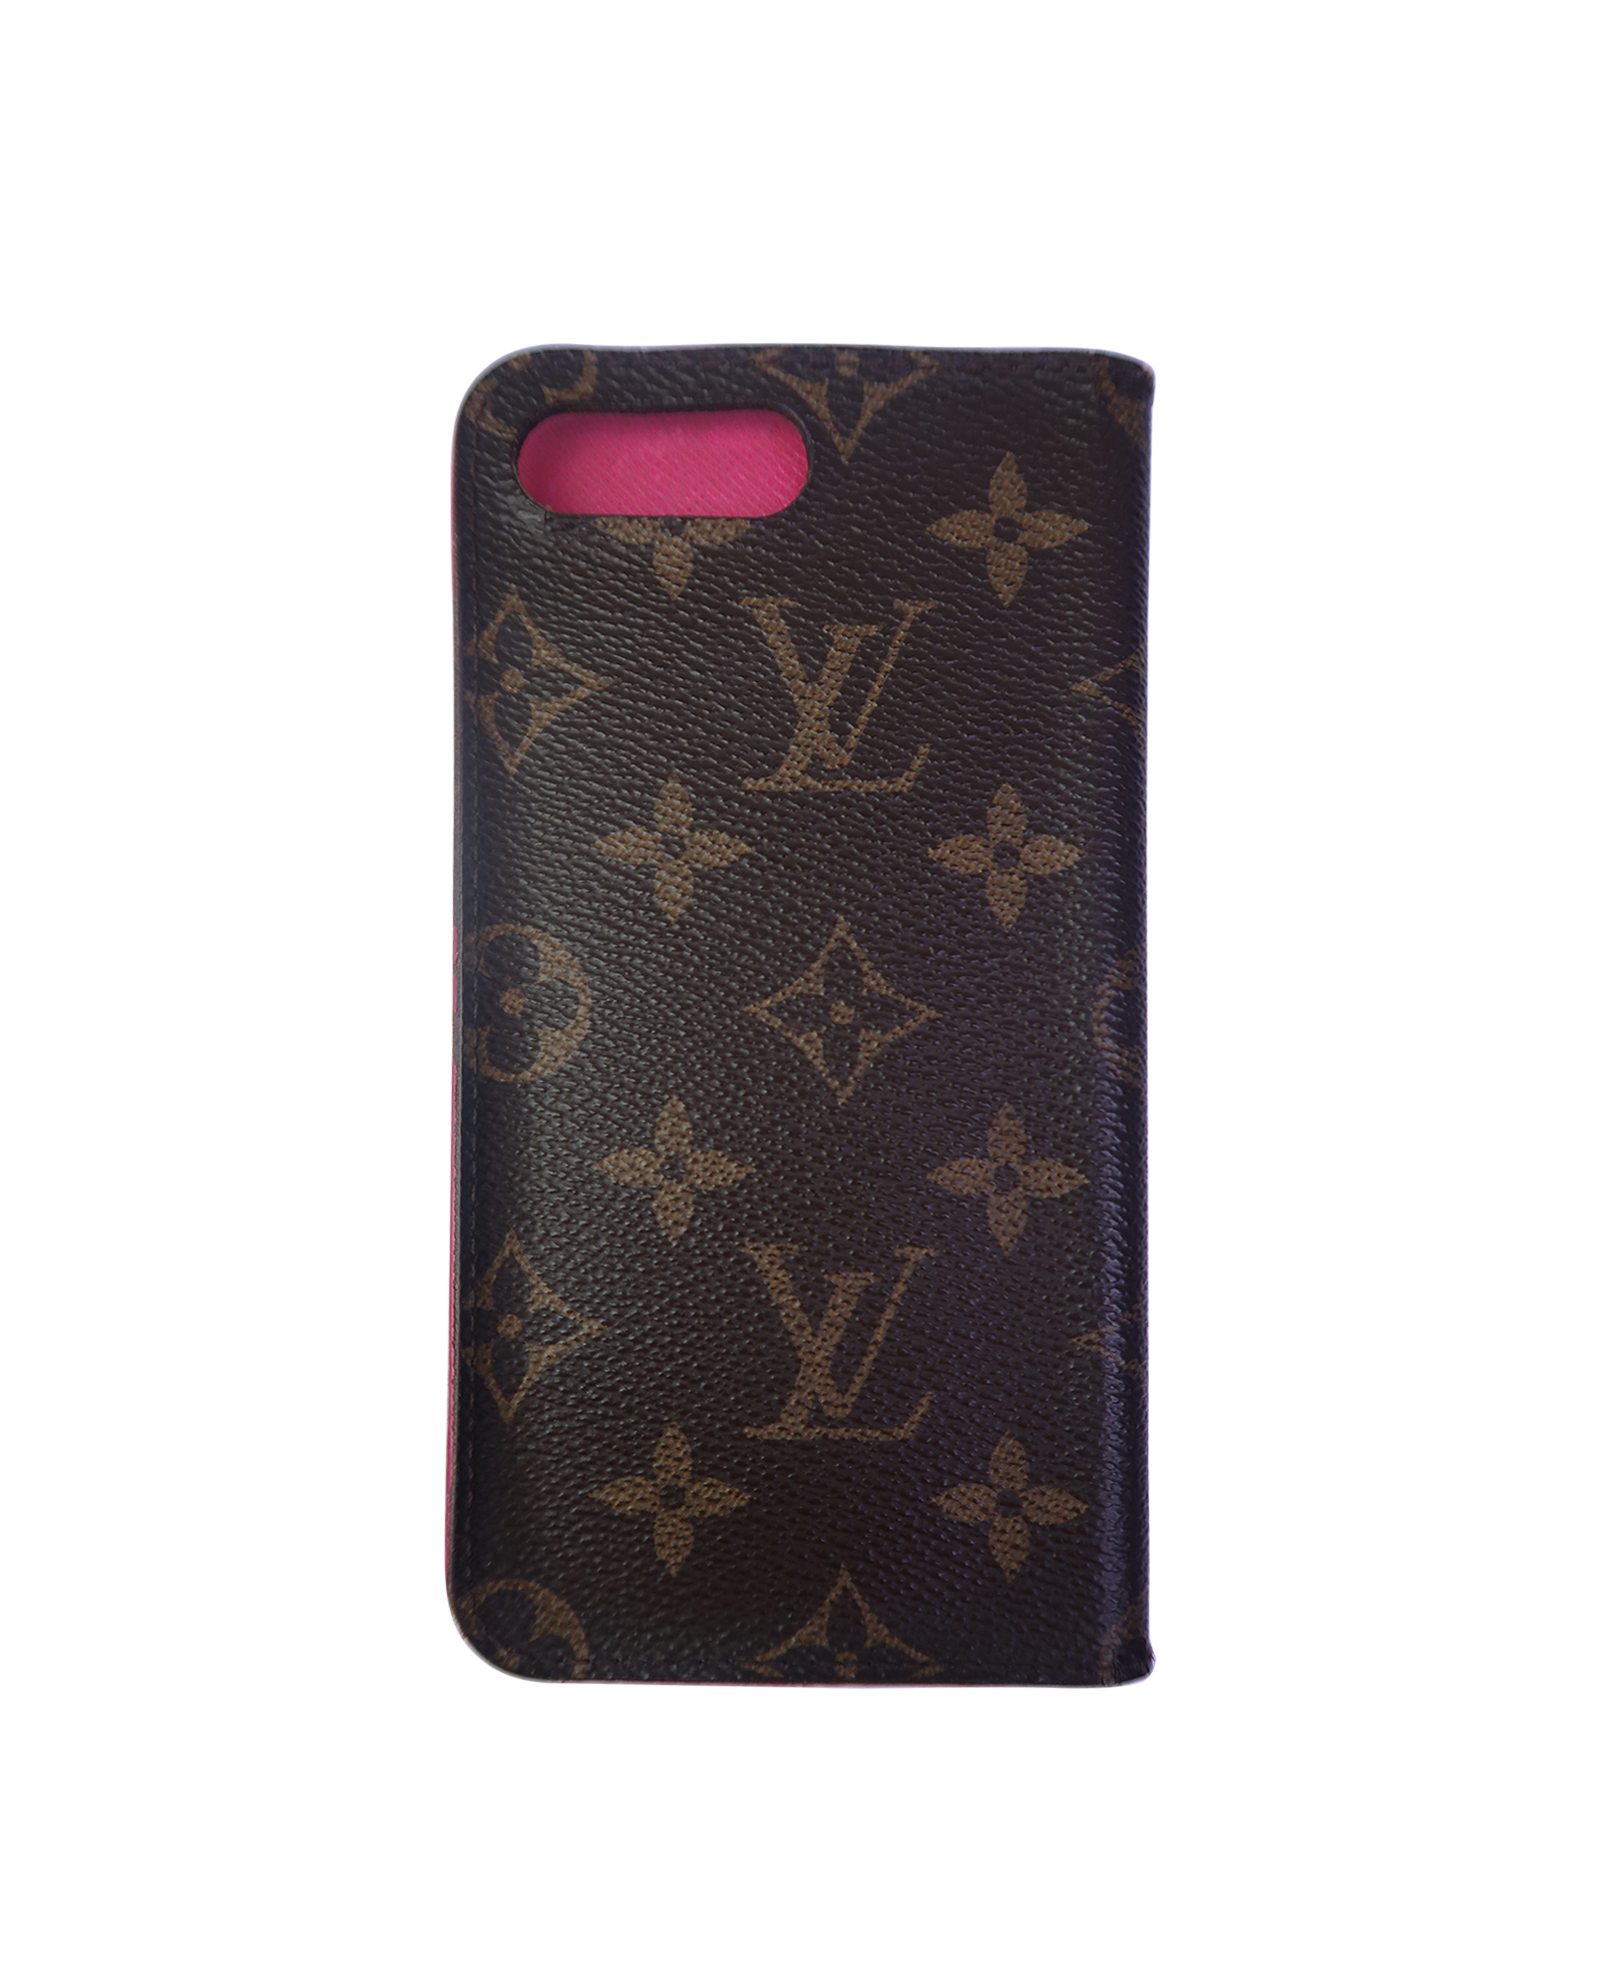 vuitton phone case with